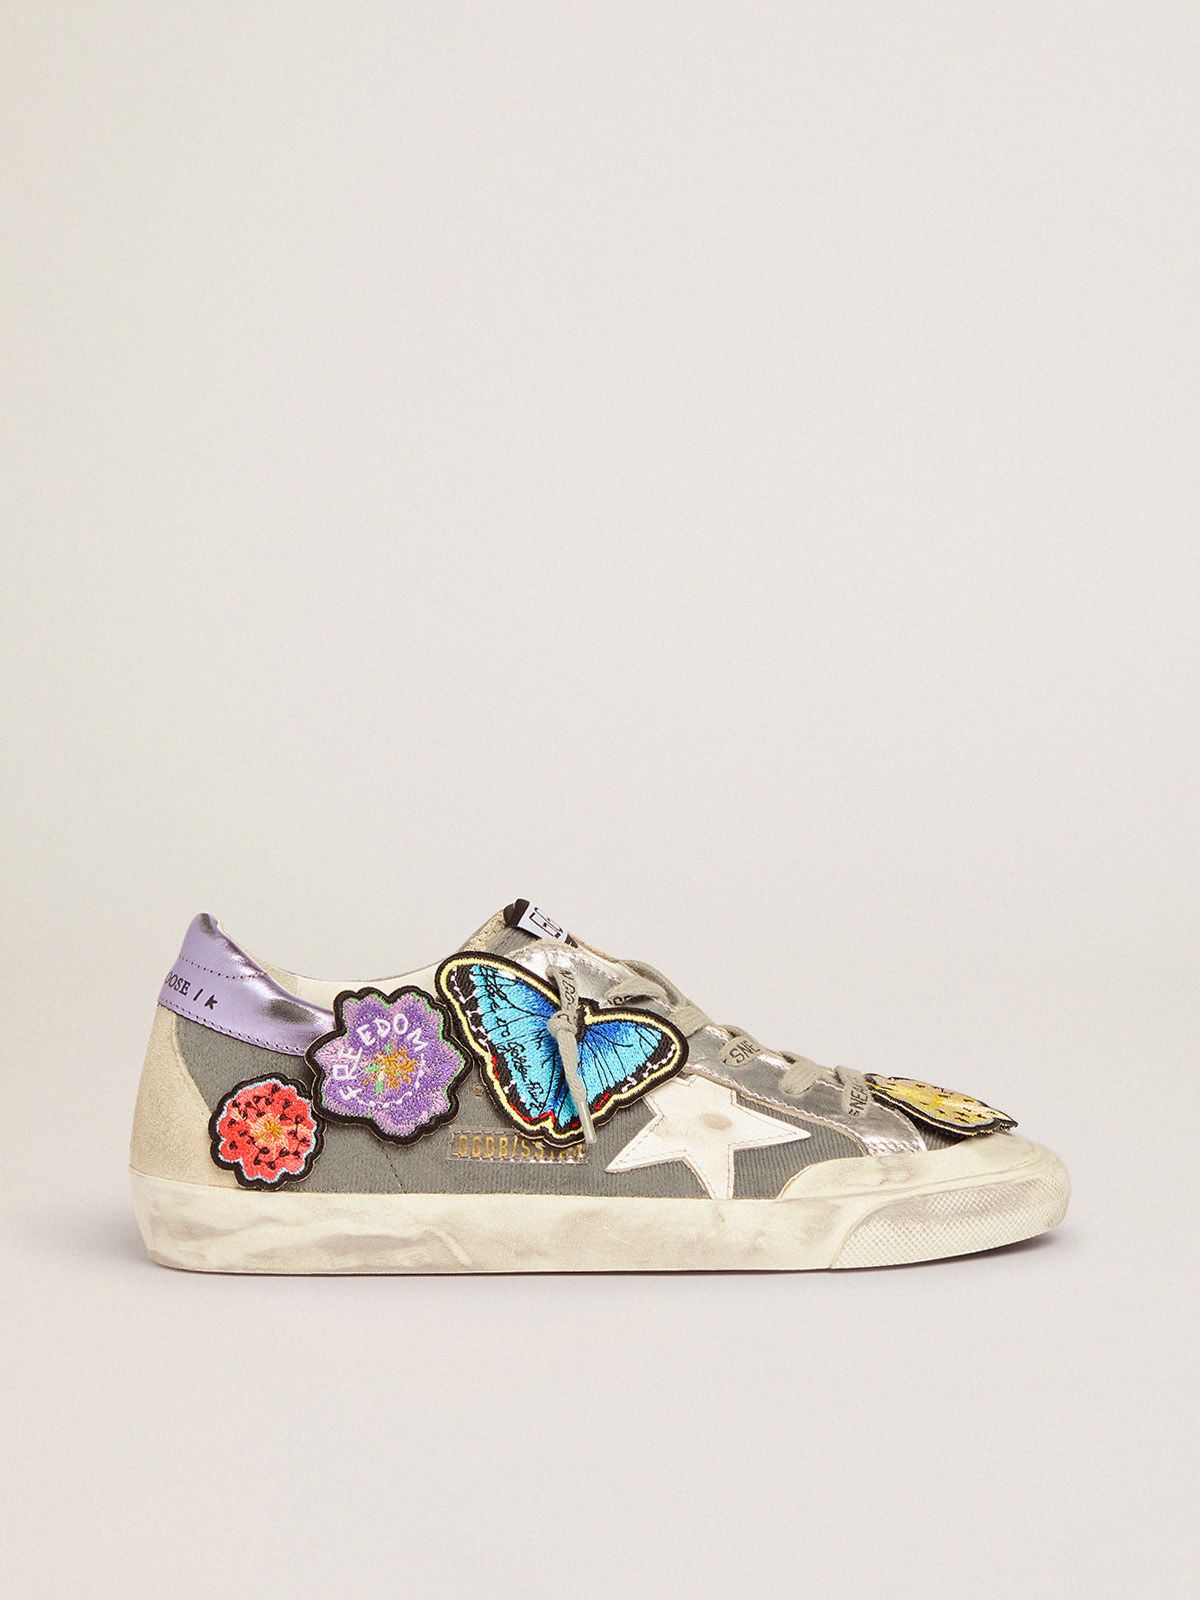 Sneakers Uomo Golden Goose Super-Star Penstar LAB sneakers with Velcro upper and appliquéd patches